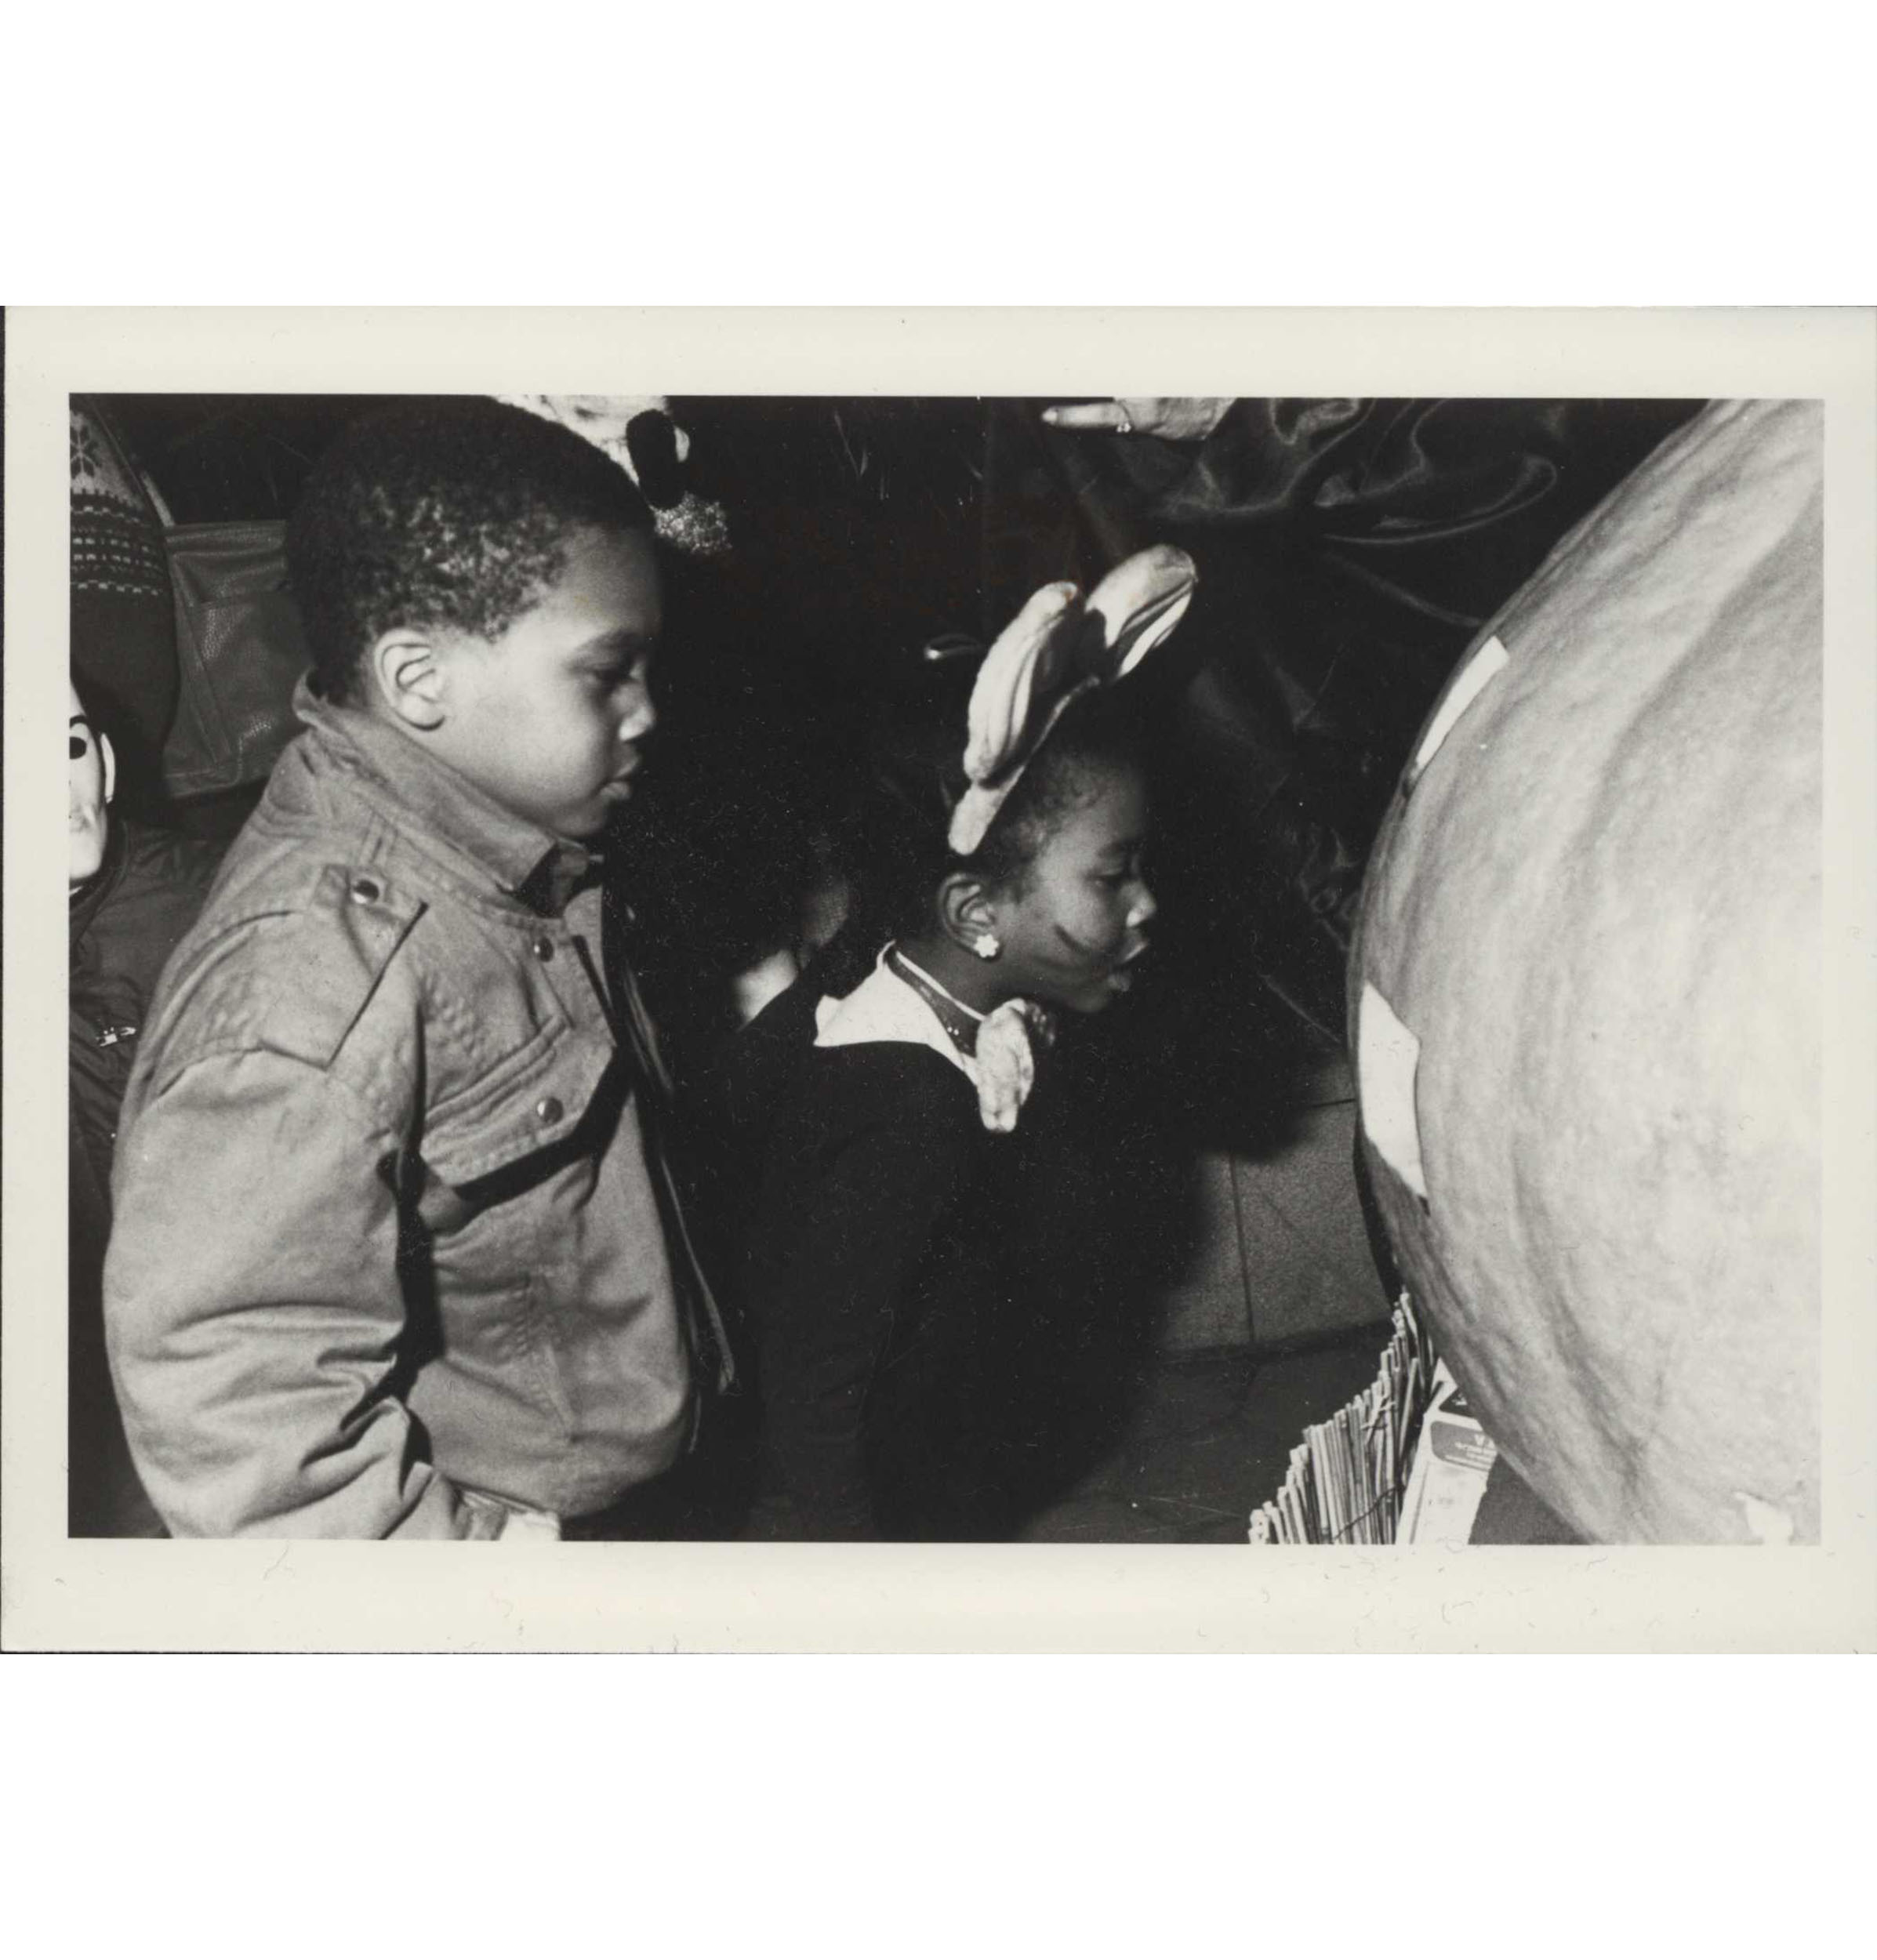 A black and white photograph of two children looking at a large pumpkin. One wears a costume with bunny ears and whiskers painted on her face.